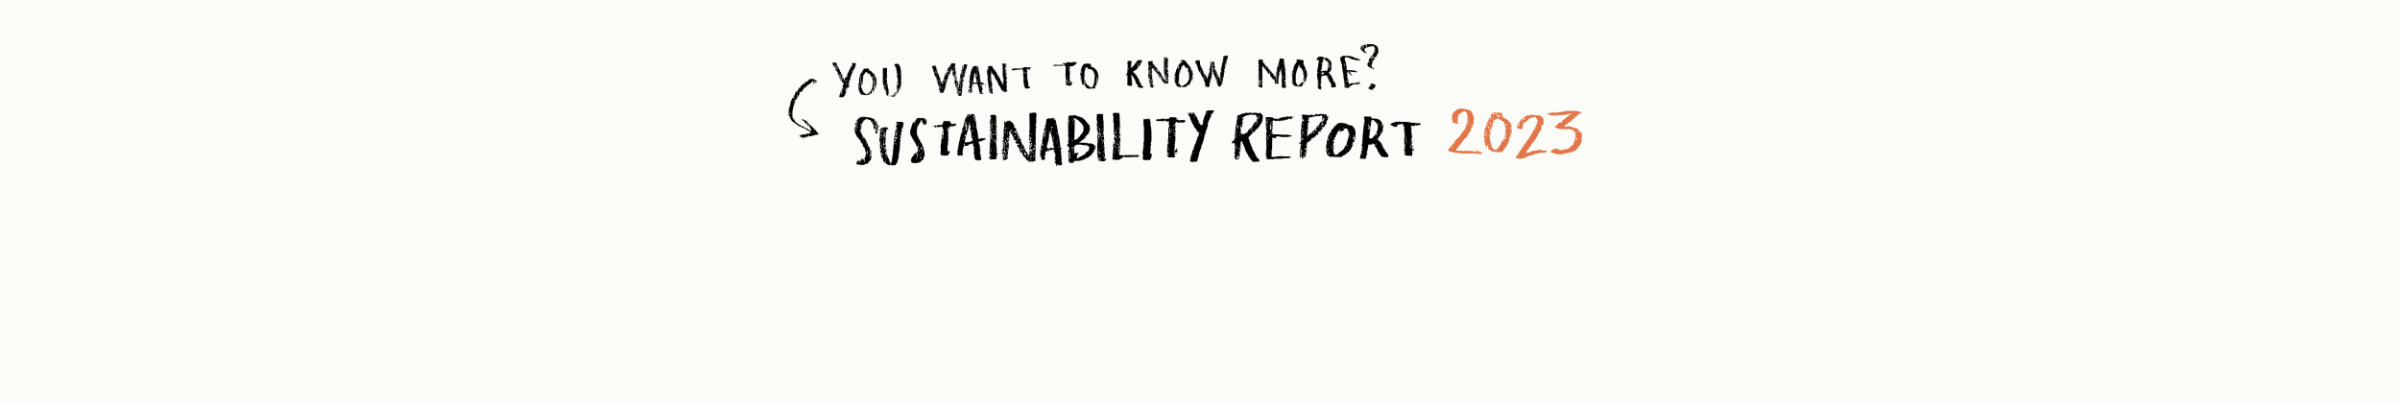 You want to know more? Sustainability Report 2023